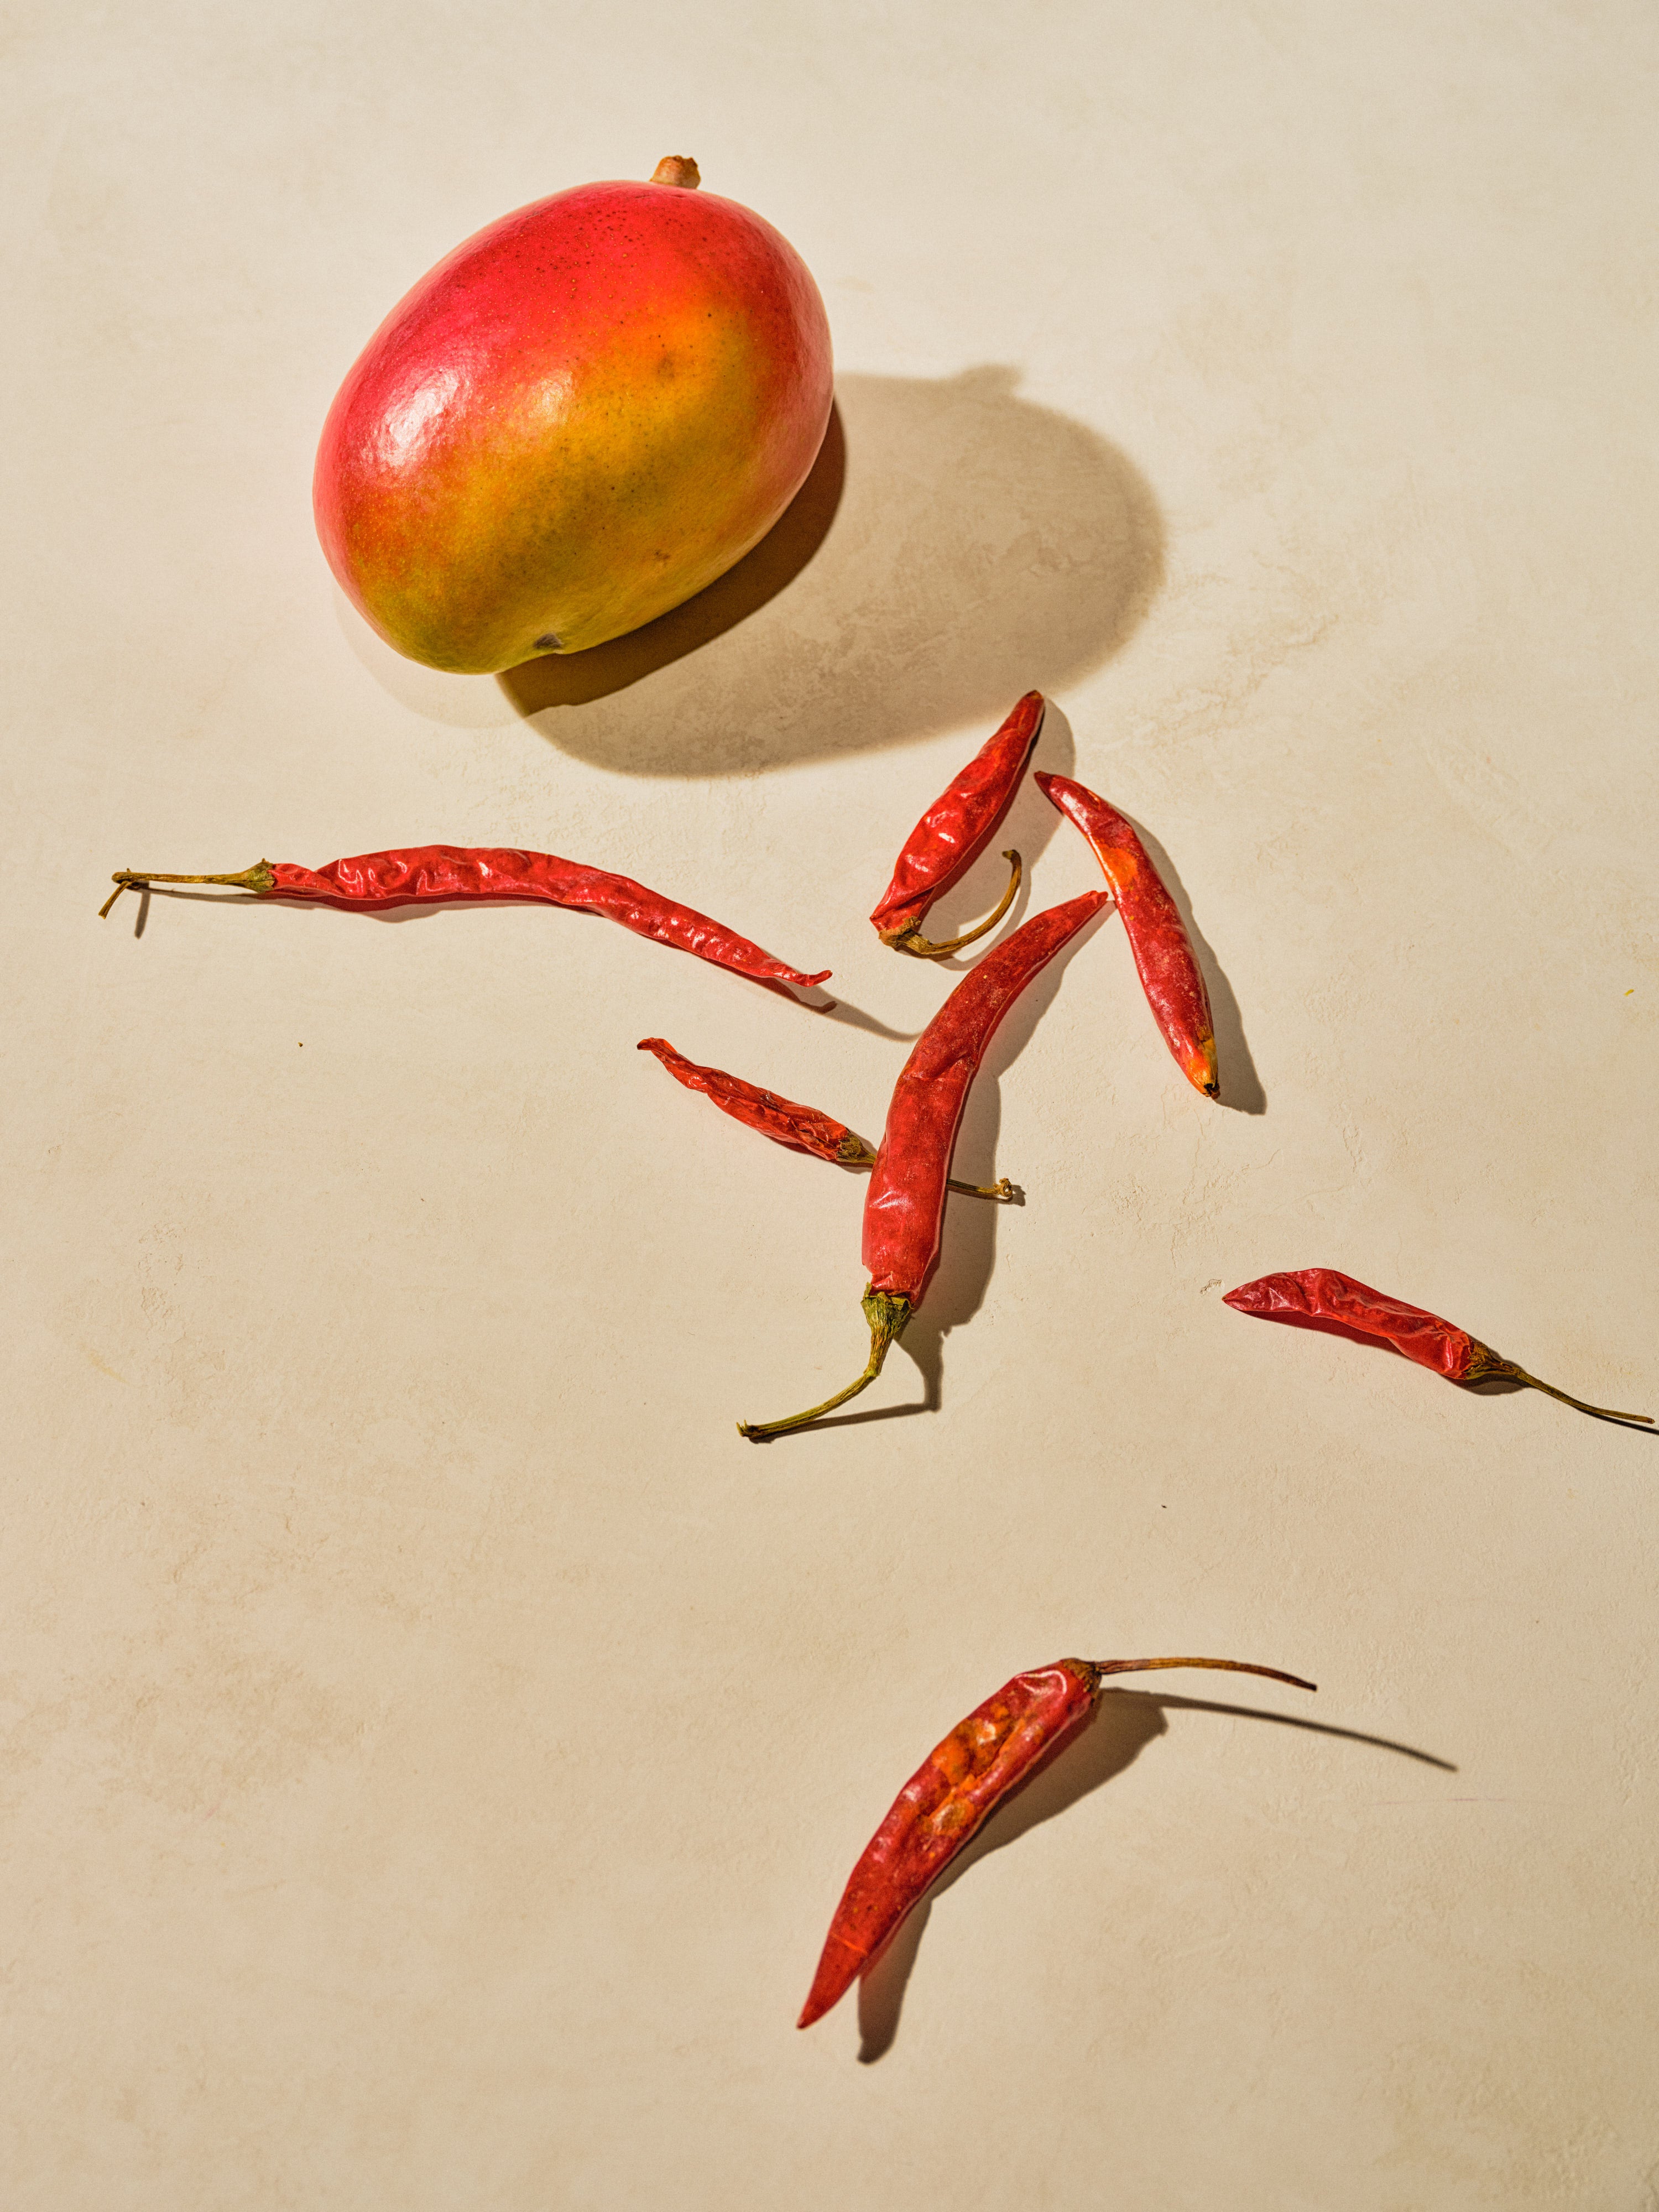 Chili Peppers 101: Nutrition Facts and Health Effects